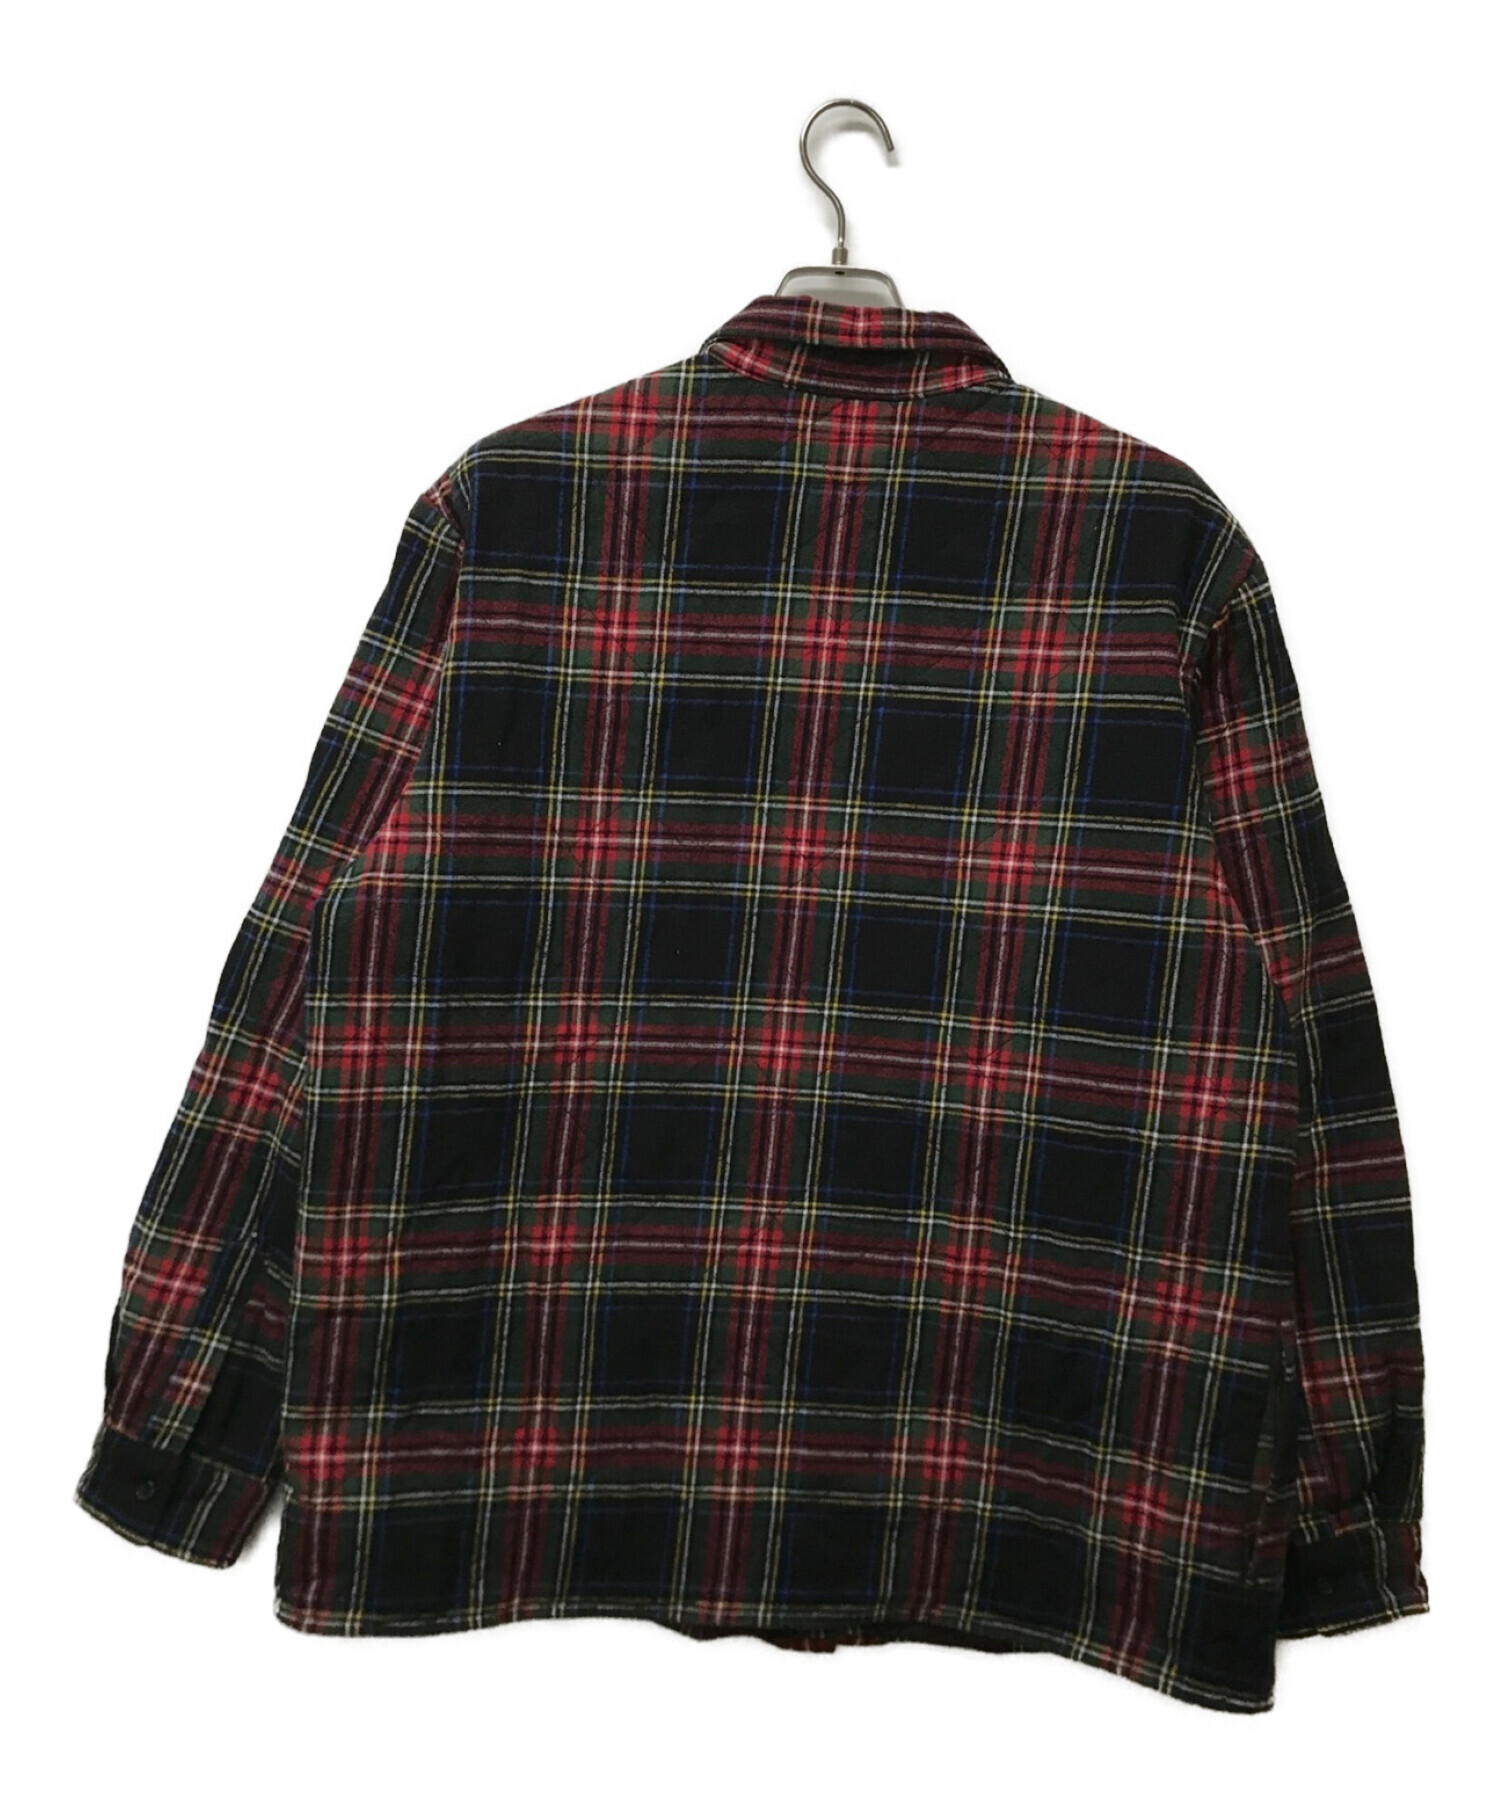 L Supreme Quilted Plaid Flannel Shirt